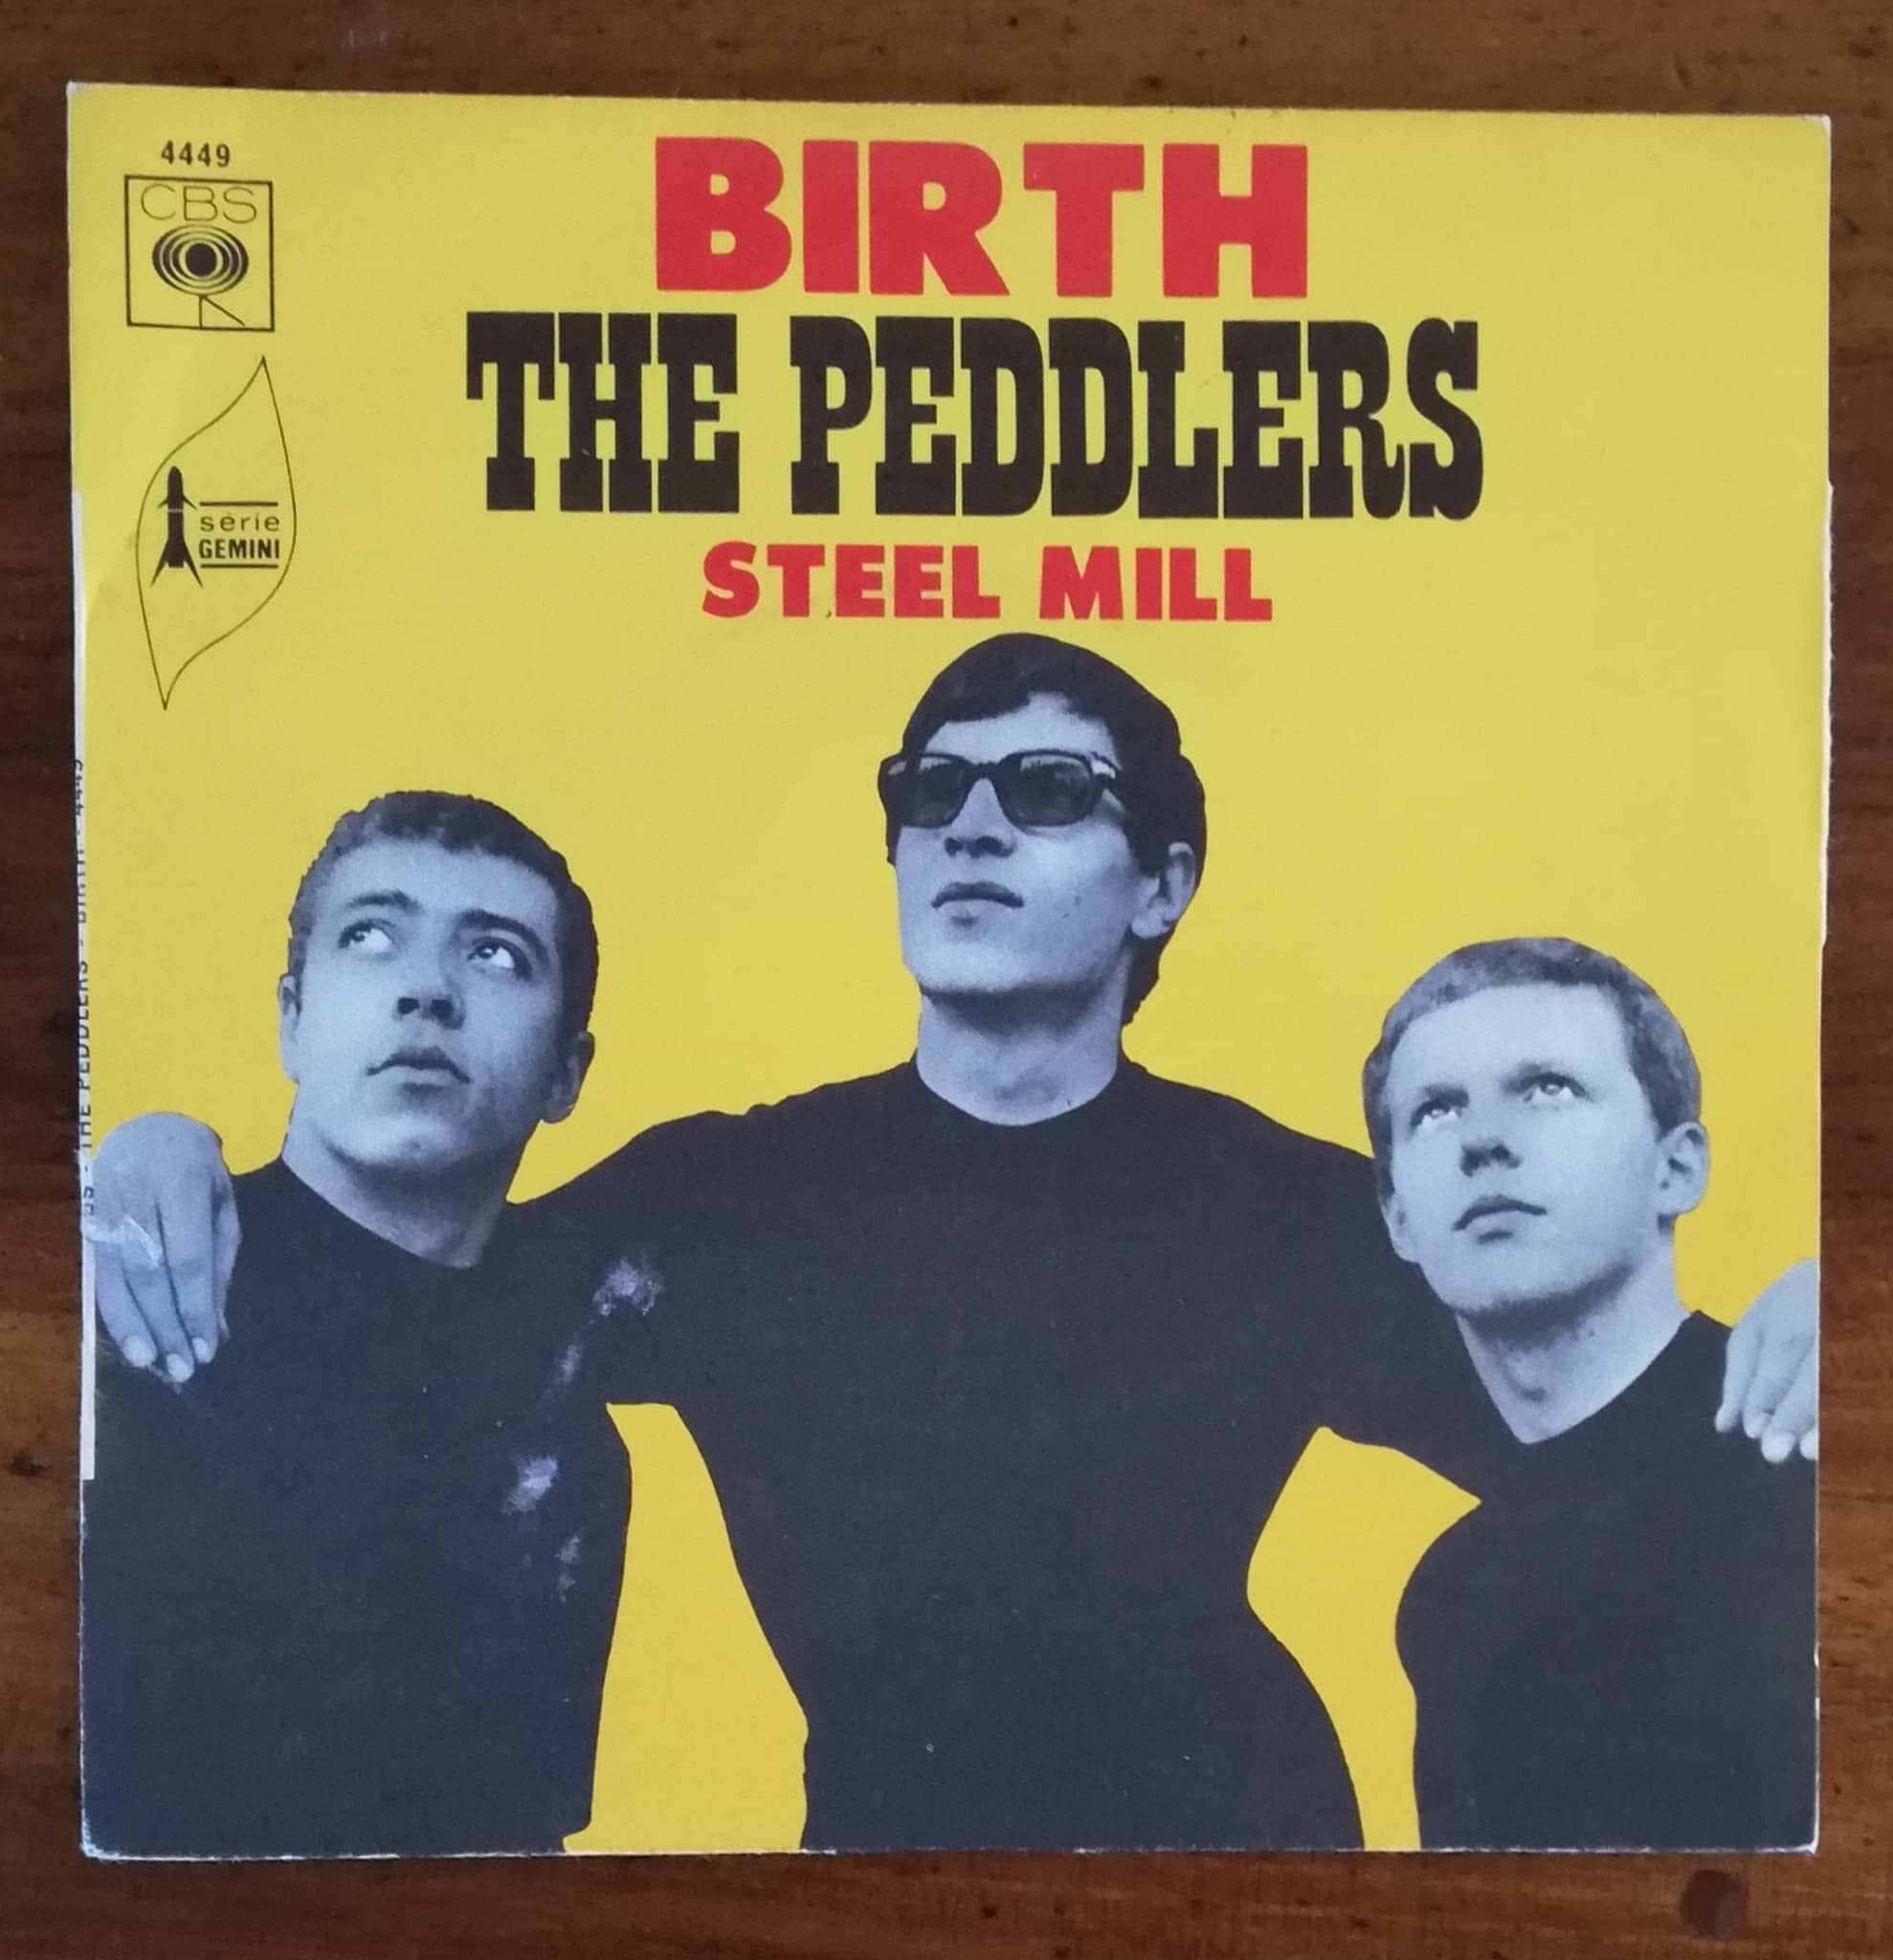 The Peddlers - Birth - CBS 4449 France 7" PS